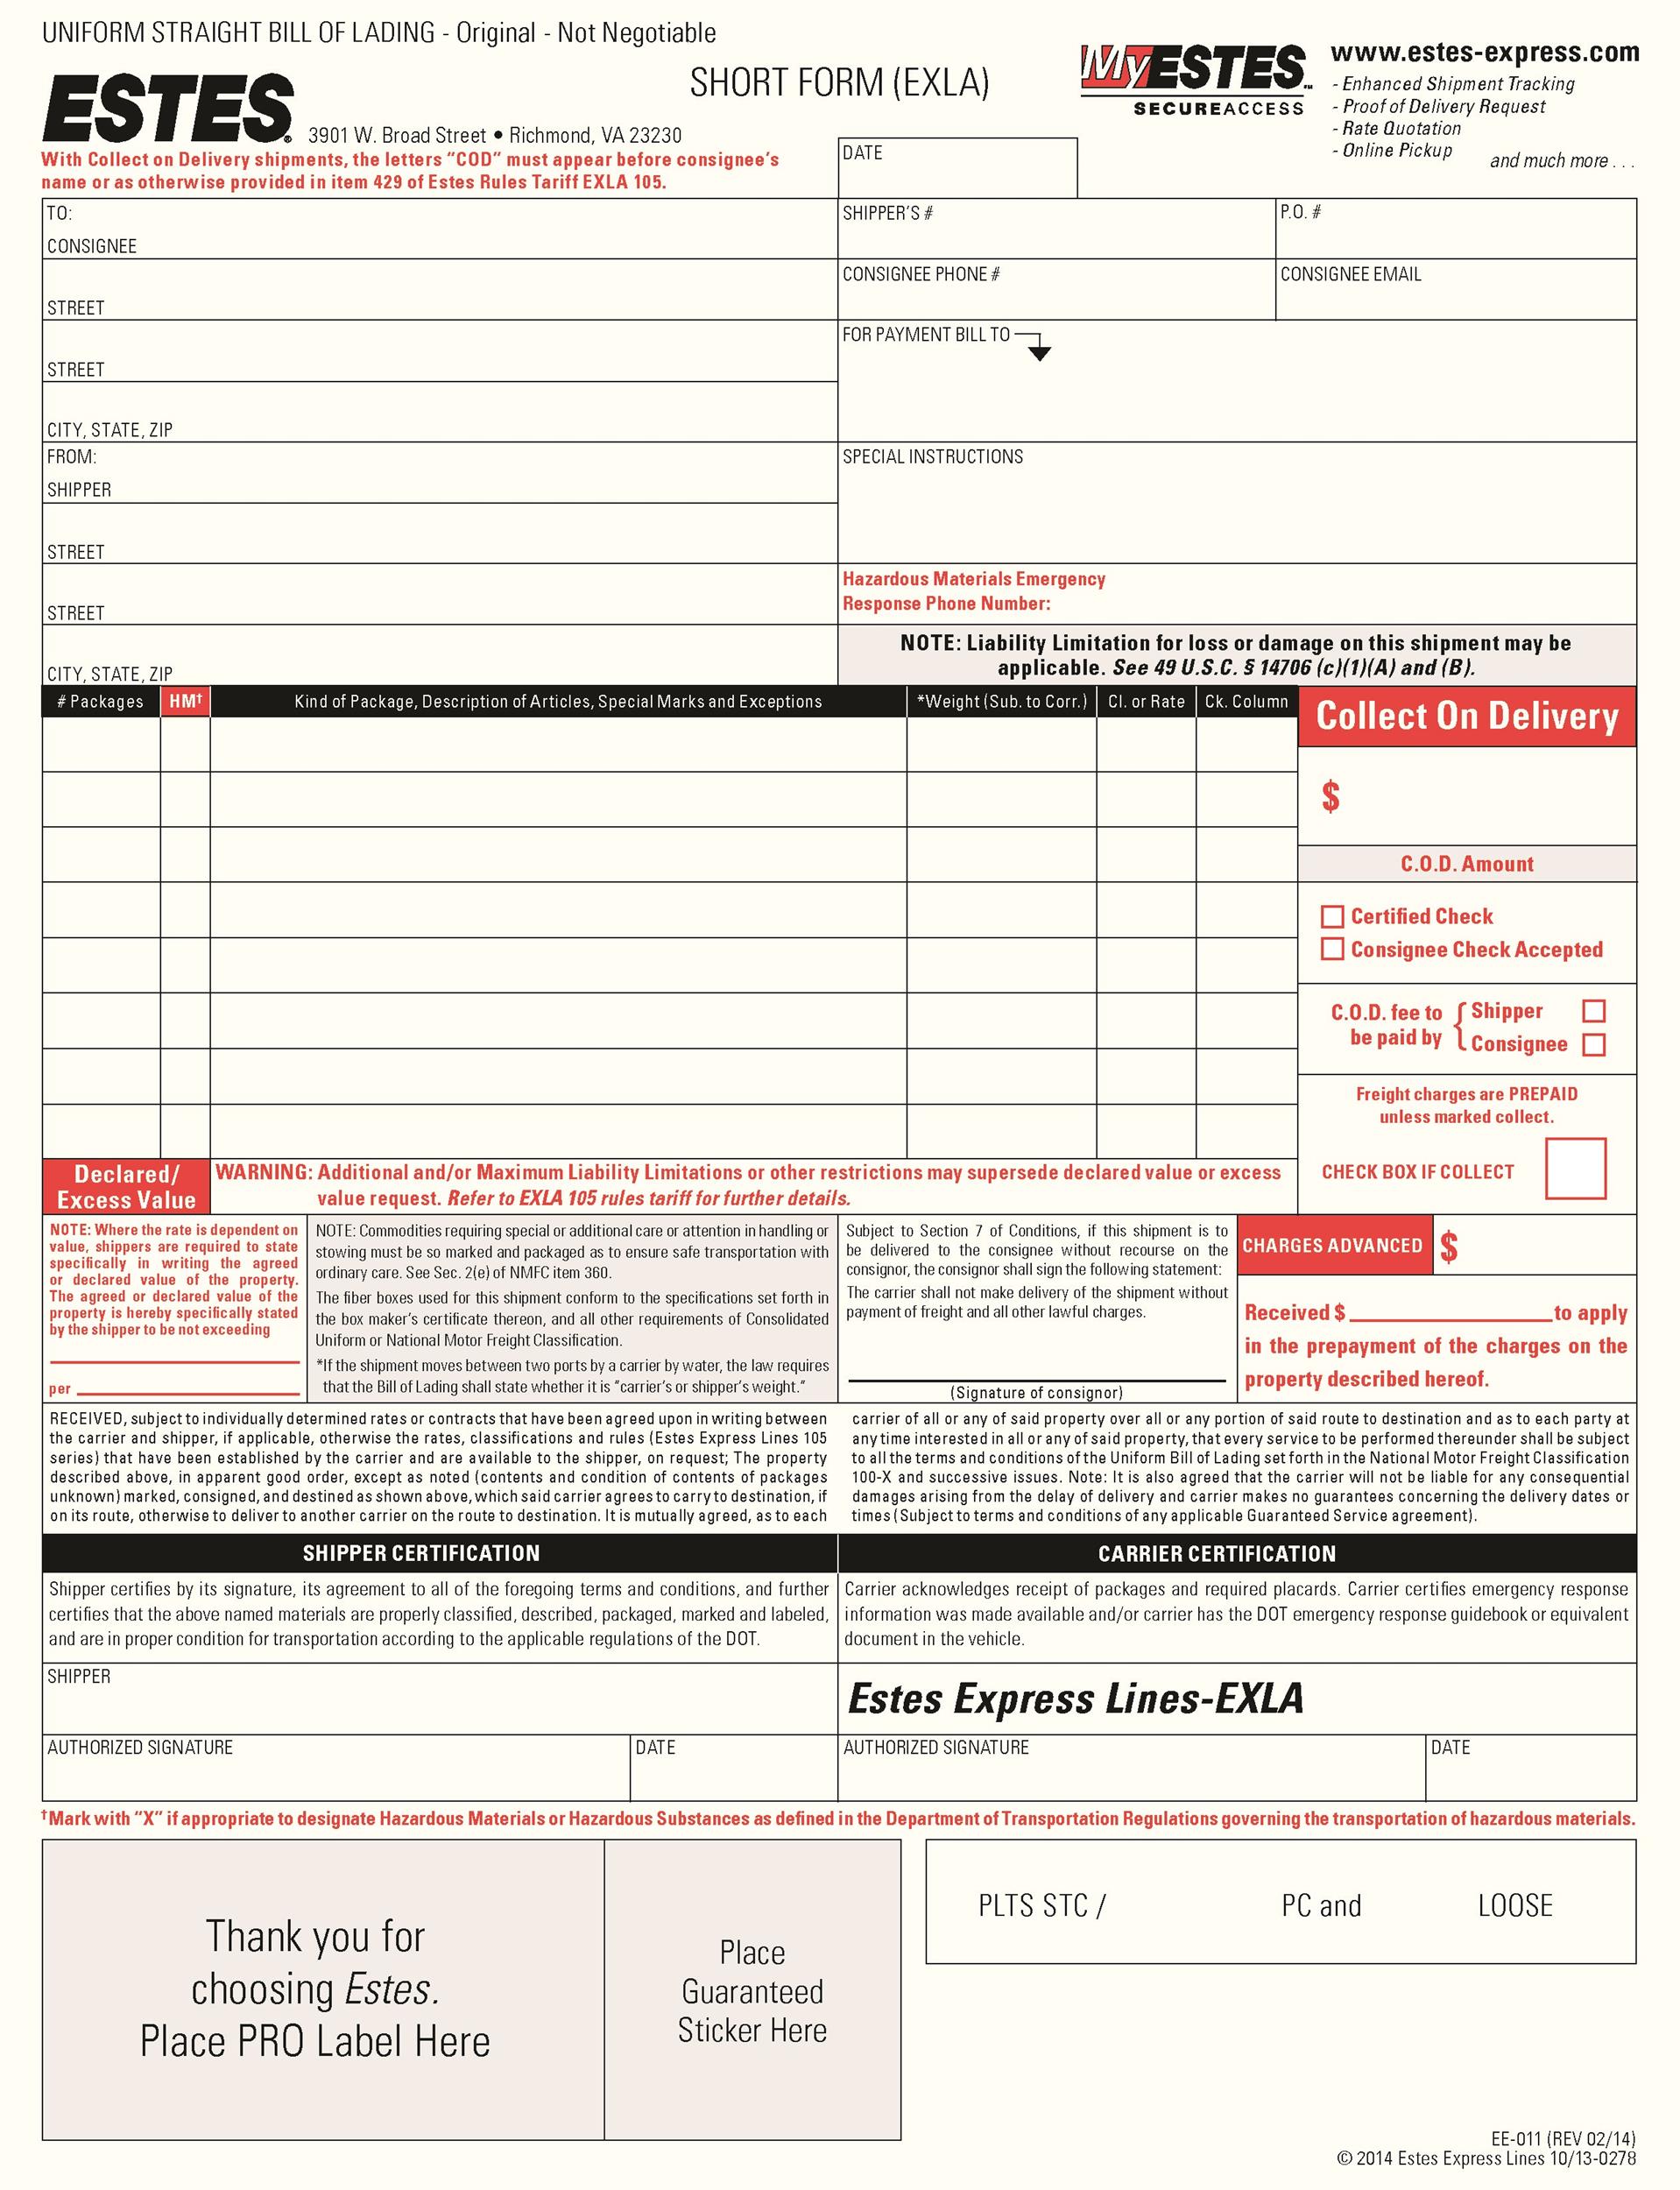 40 Free Bill of Lading Forms Templates ᐅ TemplateLab